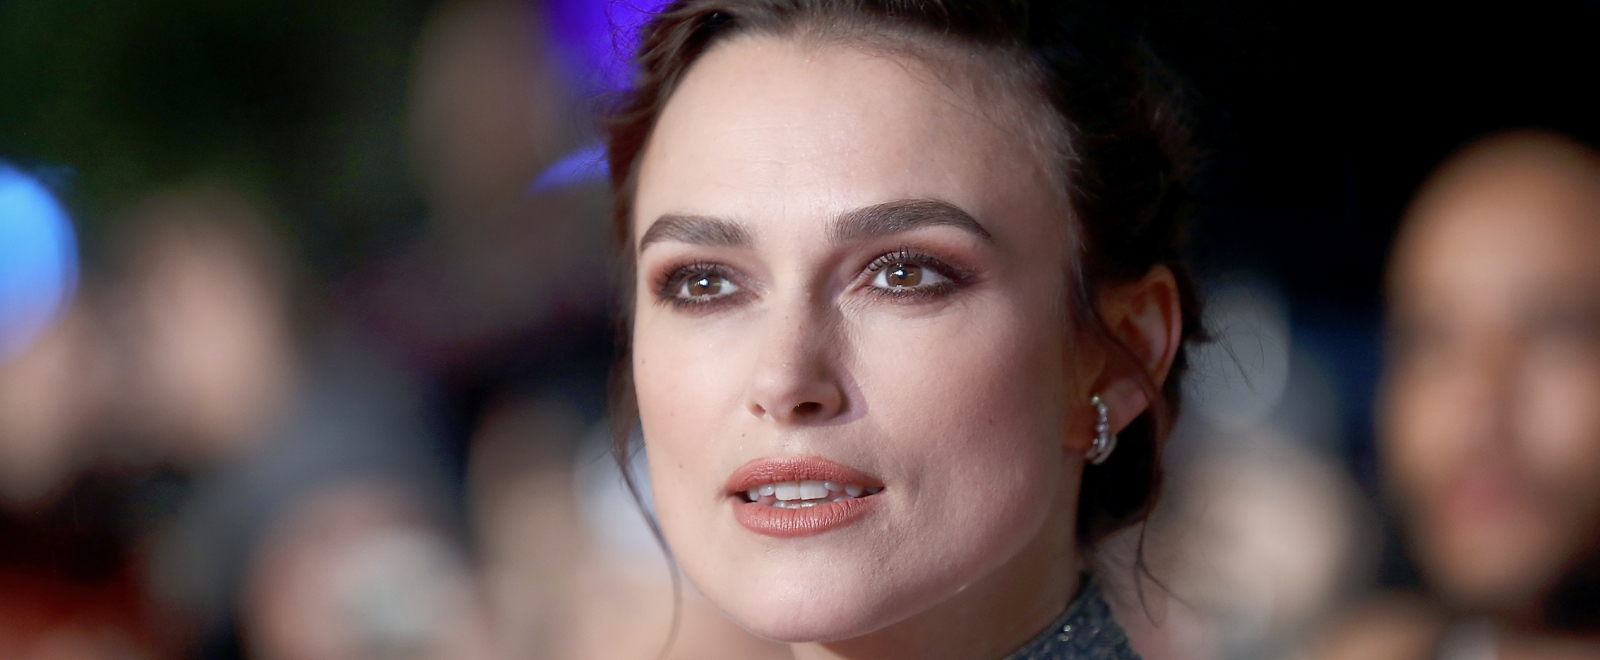 Keira Knightley Has Explained Why She’s ‘Not Interested’ In Filming Nude Scenes For Male Directors